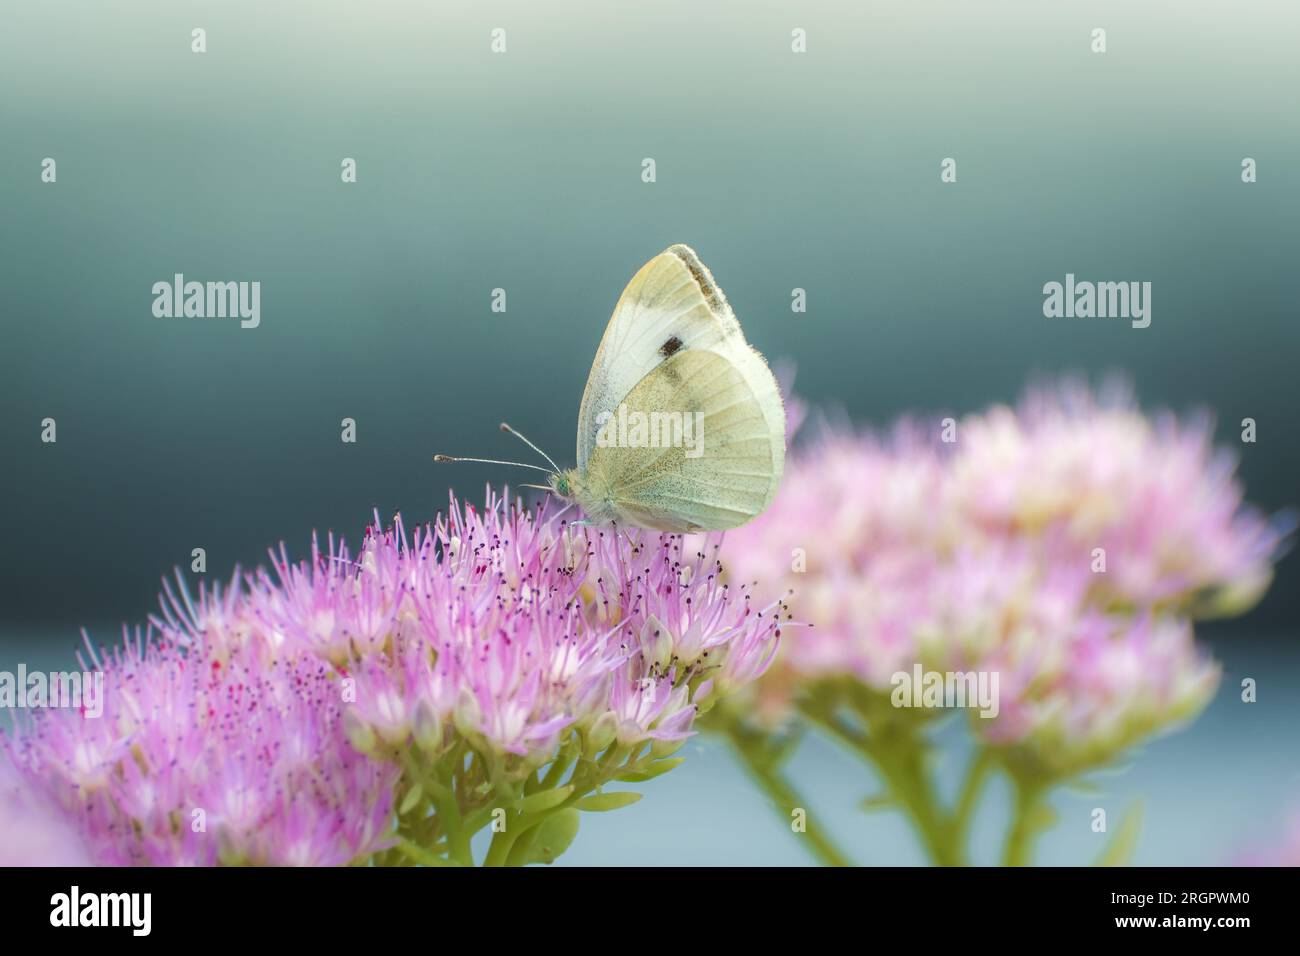 Cabbage White butterfly gathering pollen on a pink flower Stock Photo